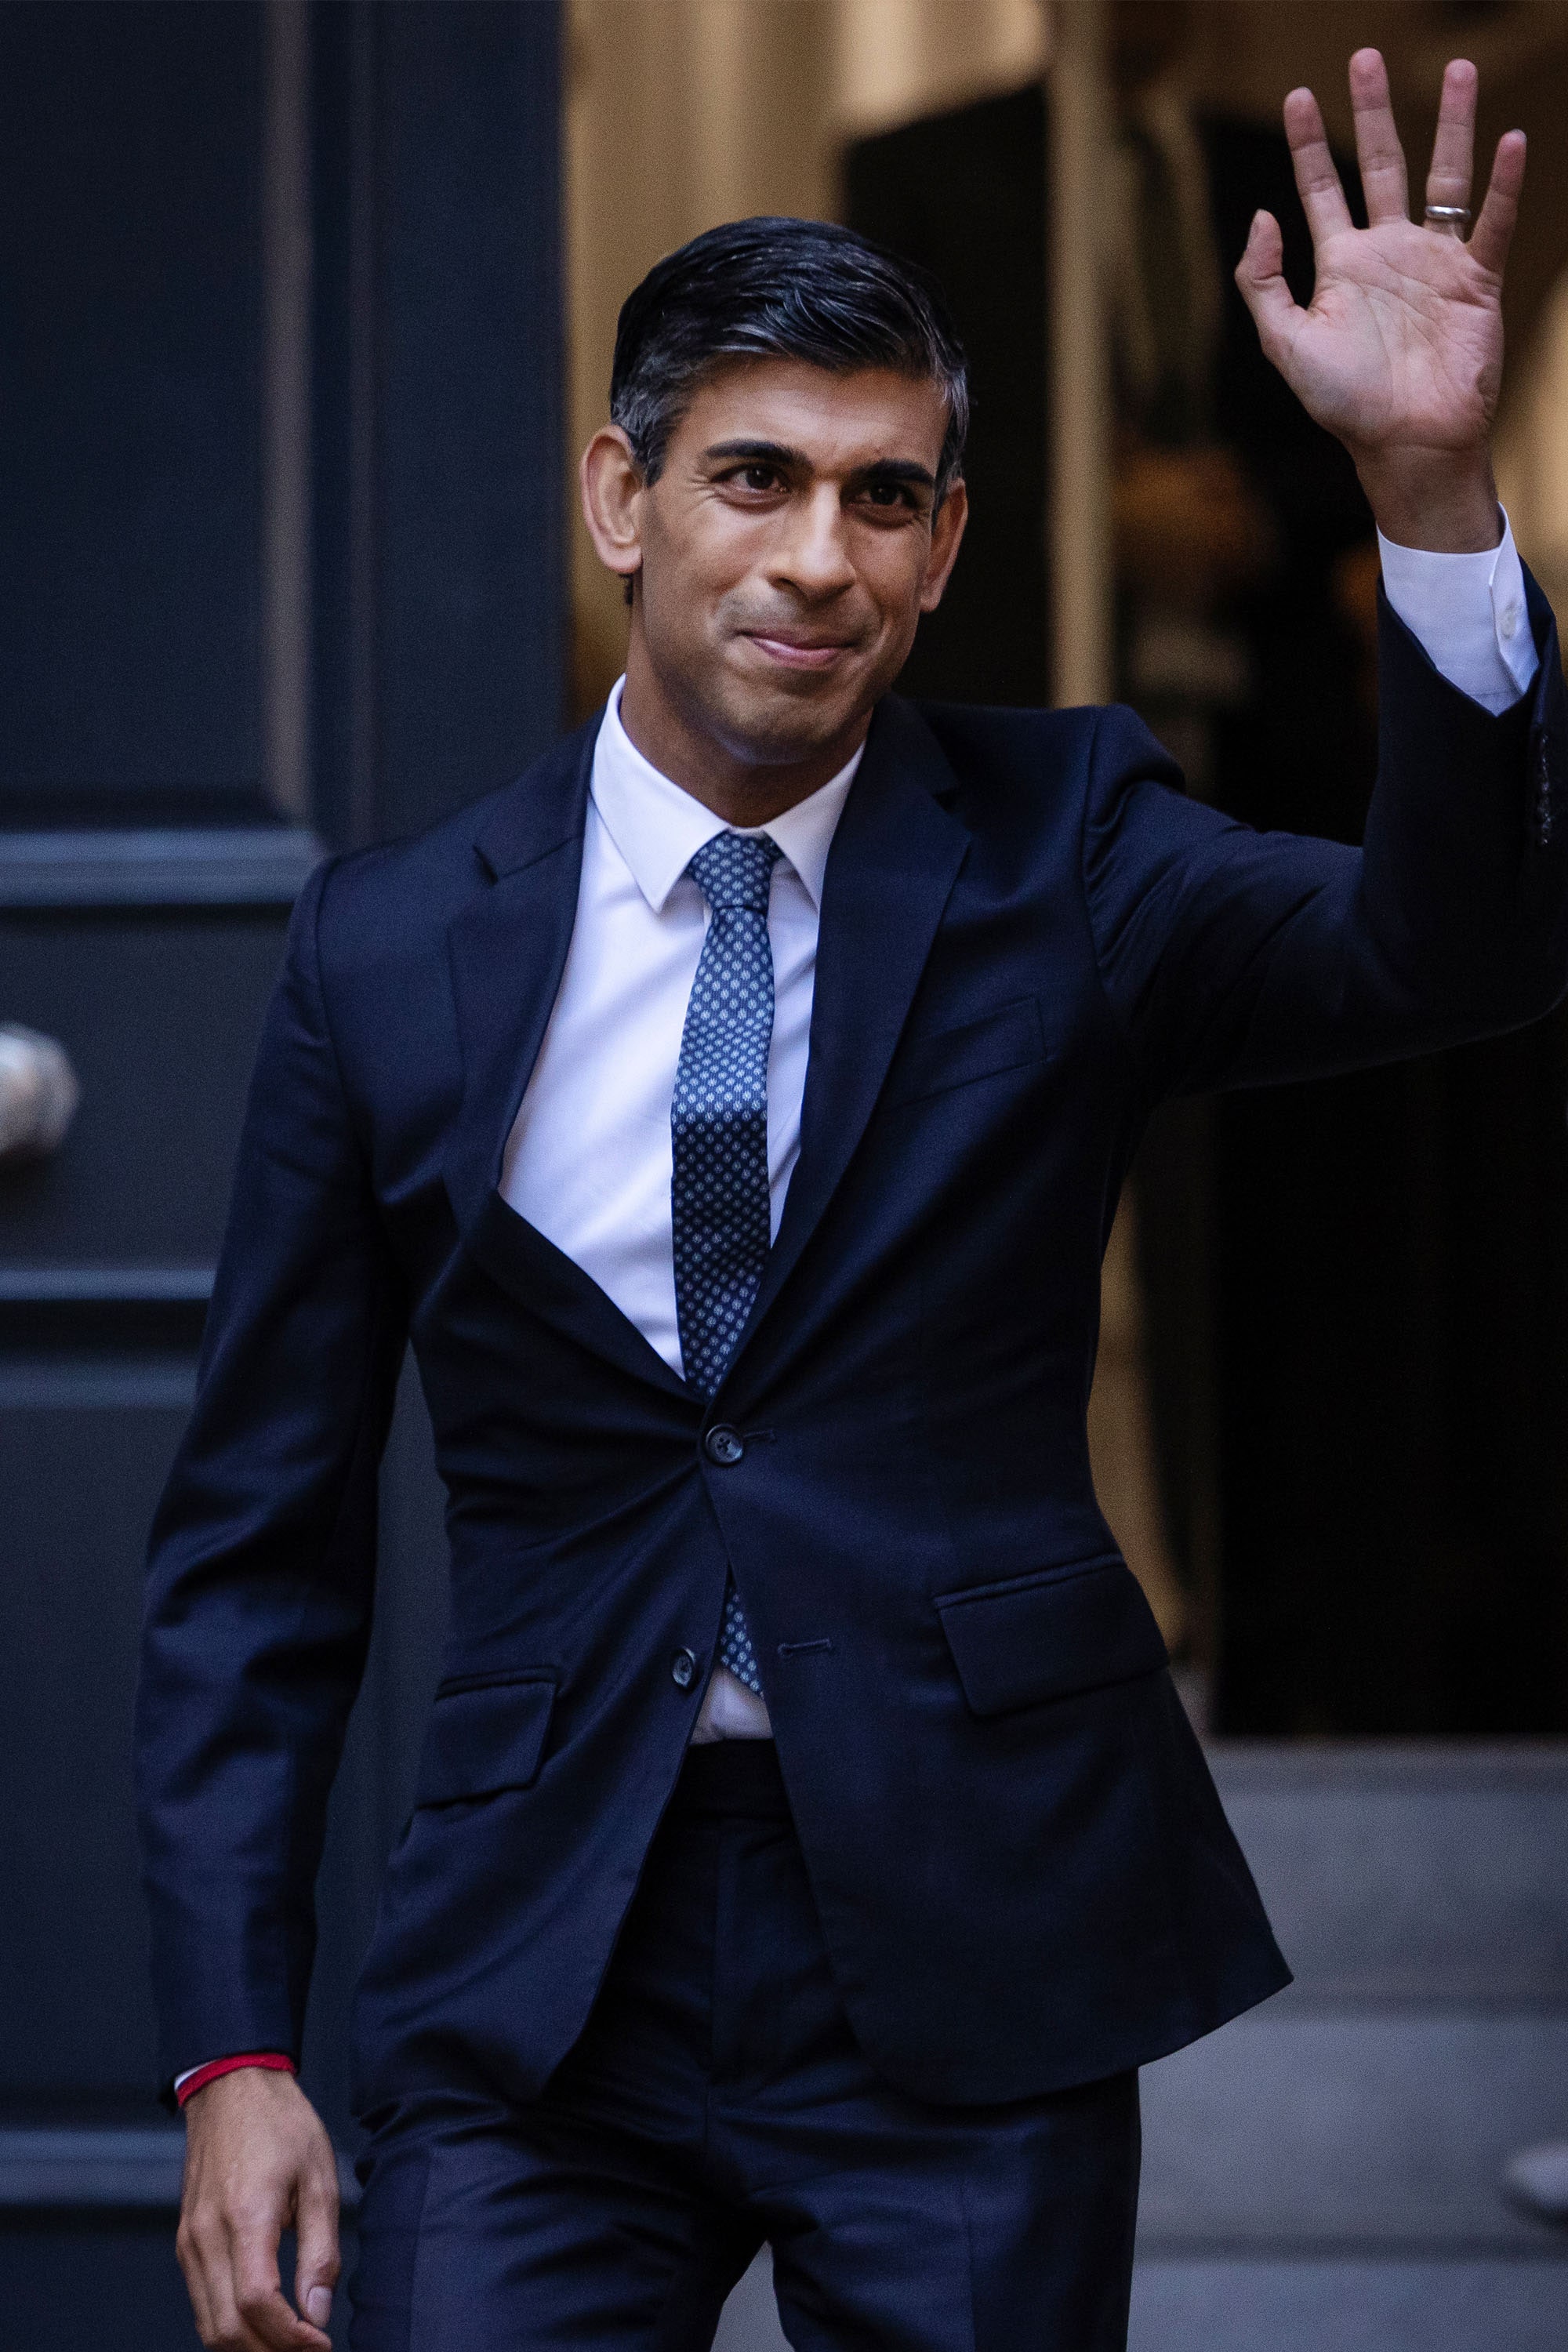 Luxury calls for stability as Rishi Sunak becomes UK prime minister